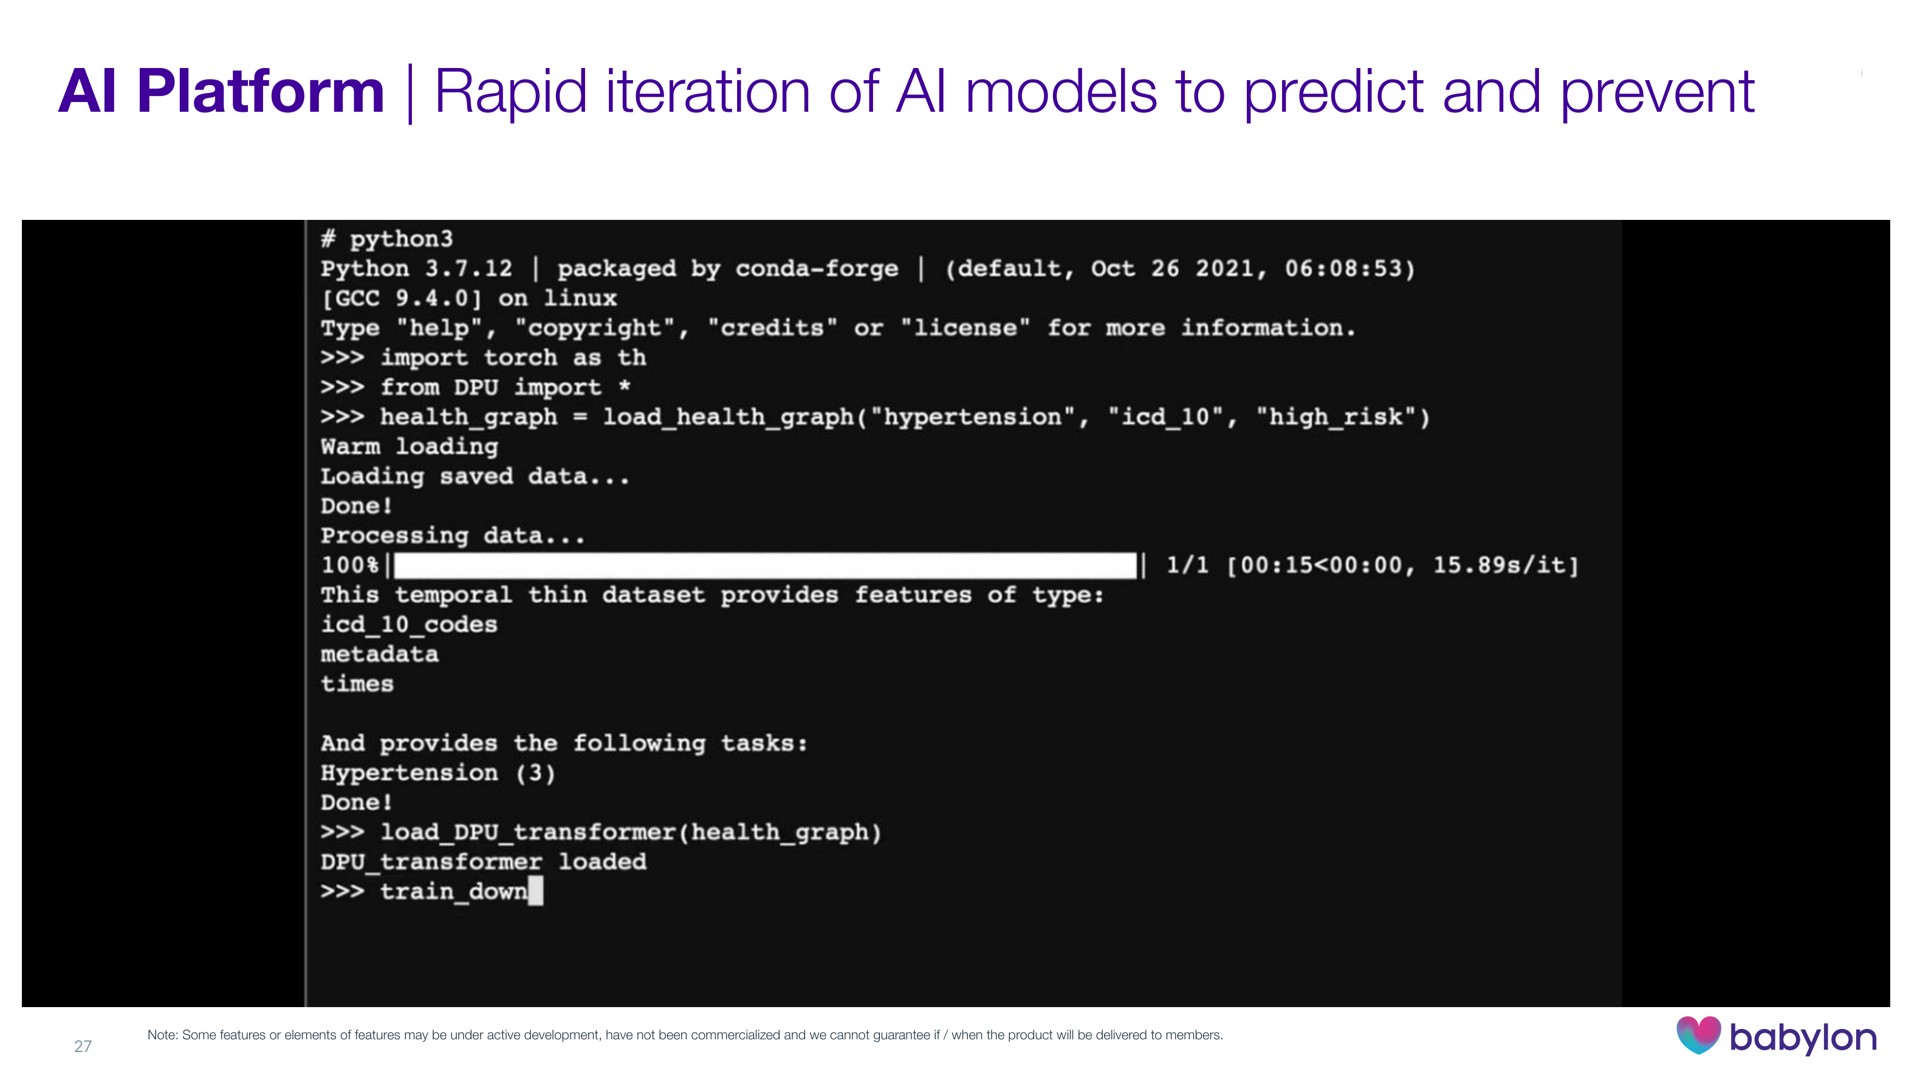 platform rapid iteration of models to predict and prevent | Babylon